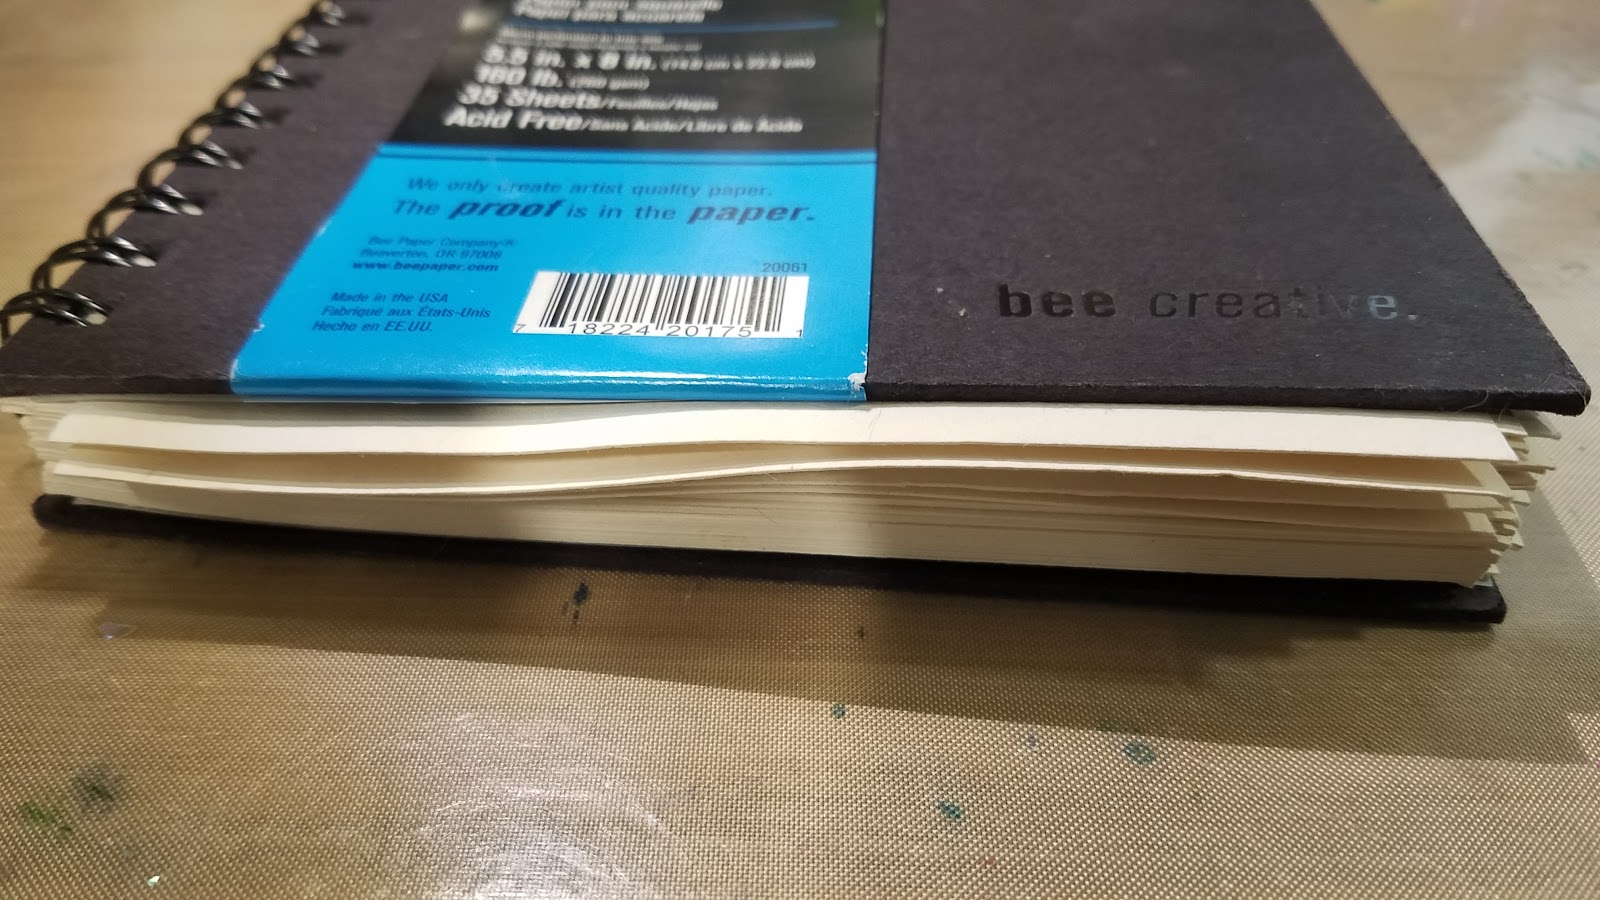 Bee Paper 100% Cotton Watercolor Sheets 22 inch x 30 inch 140lb 5pk